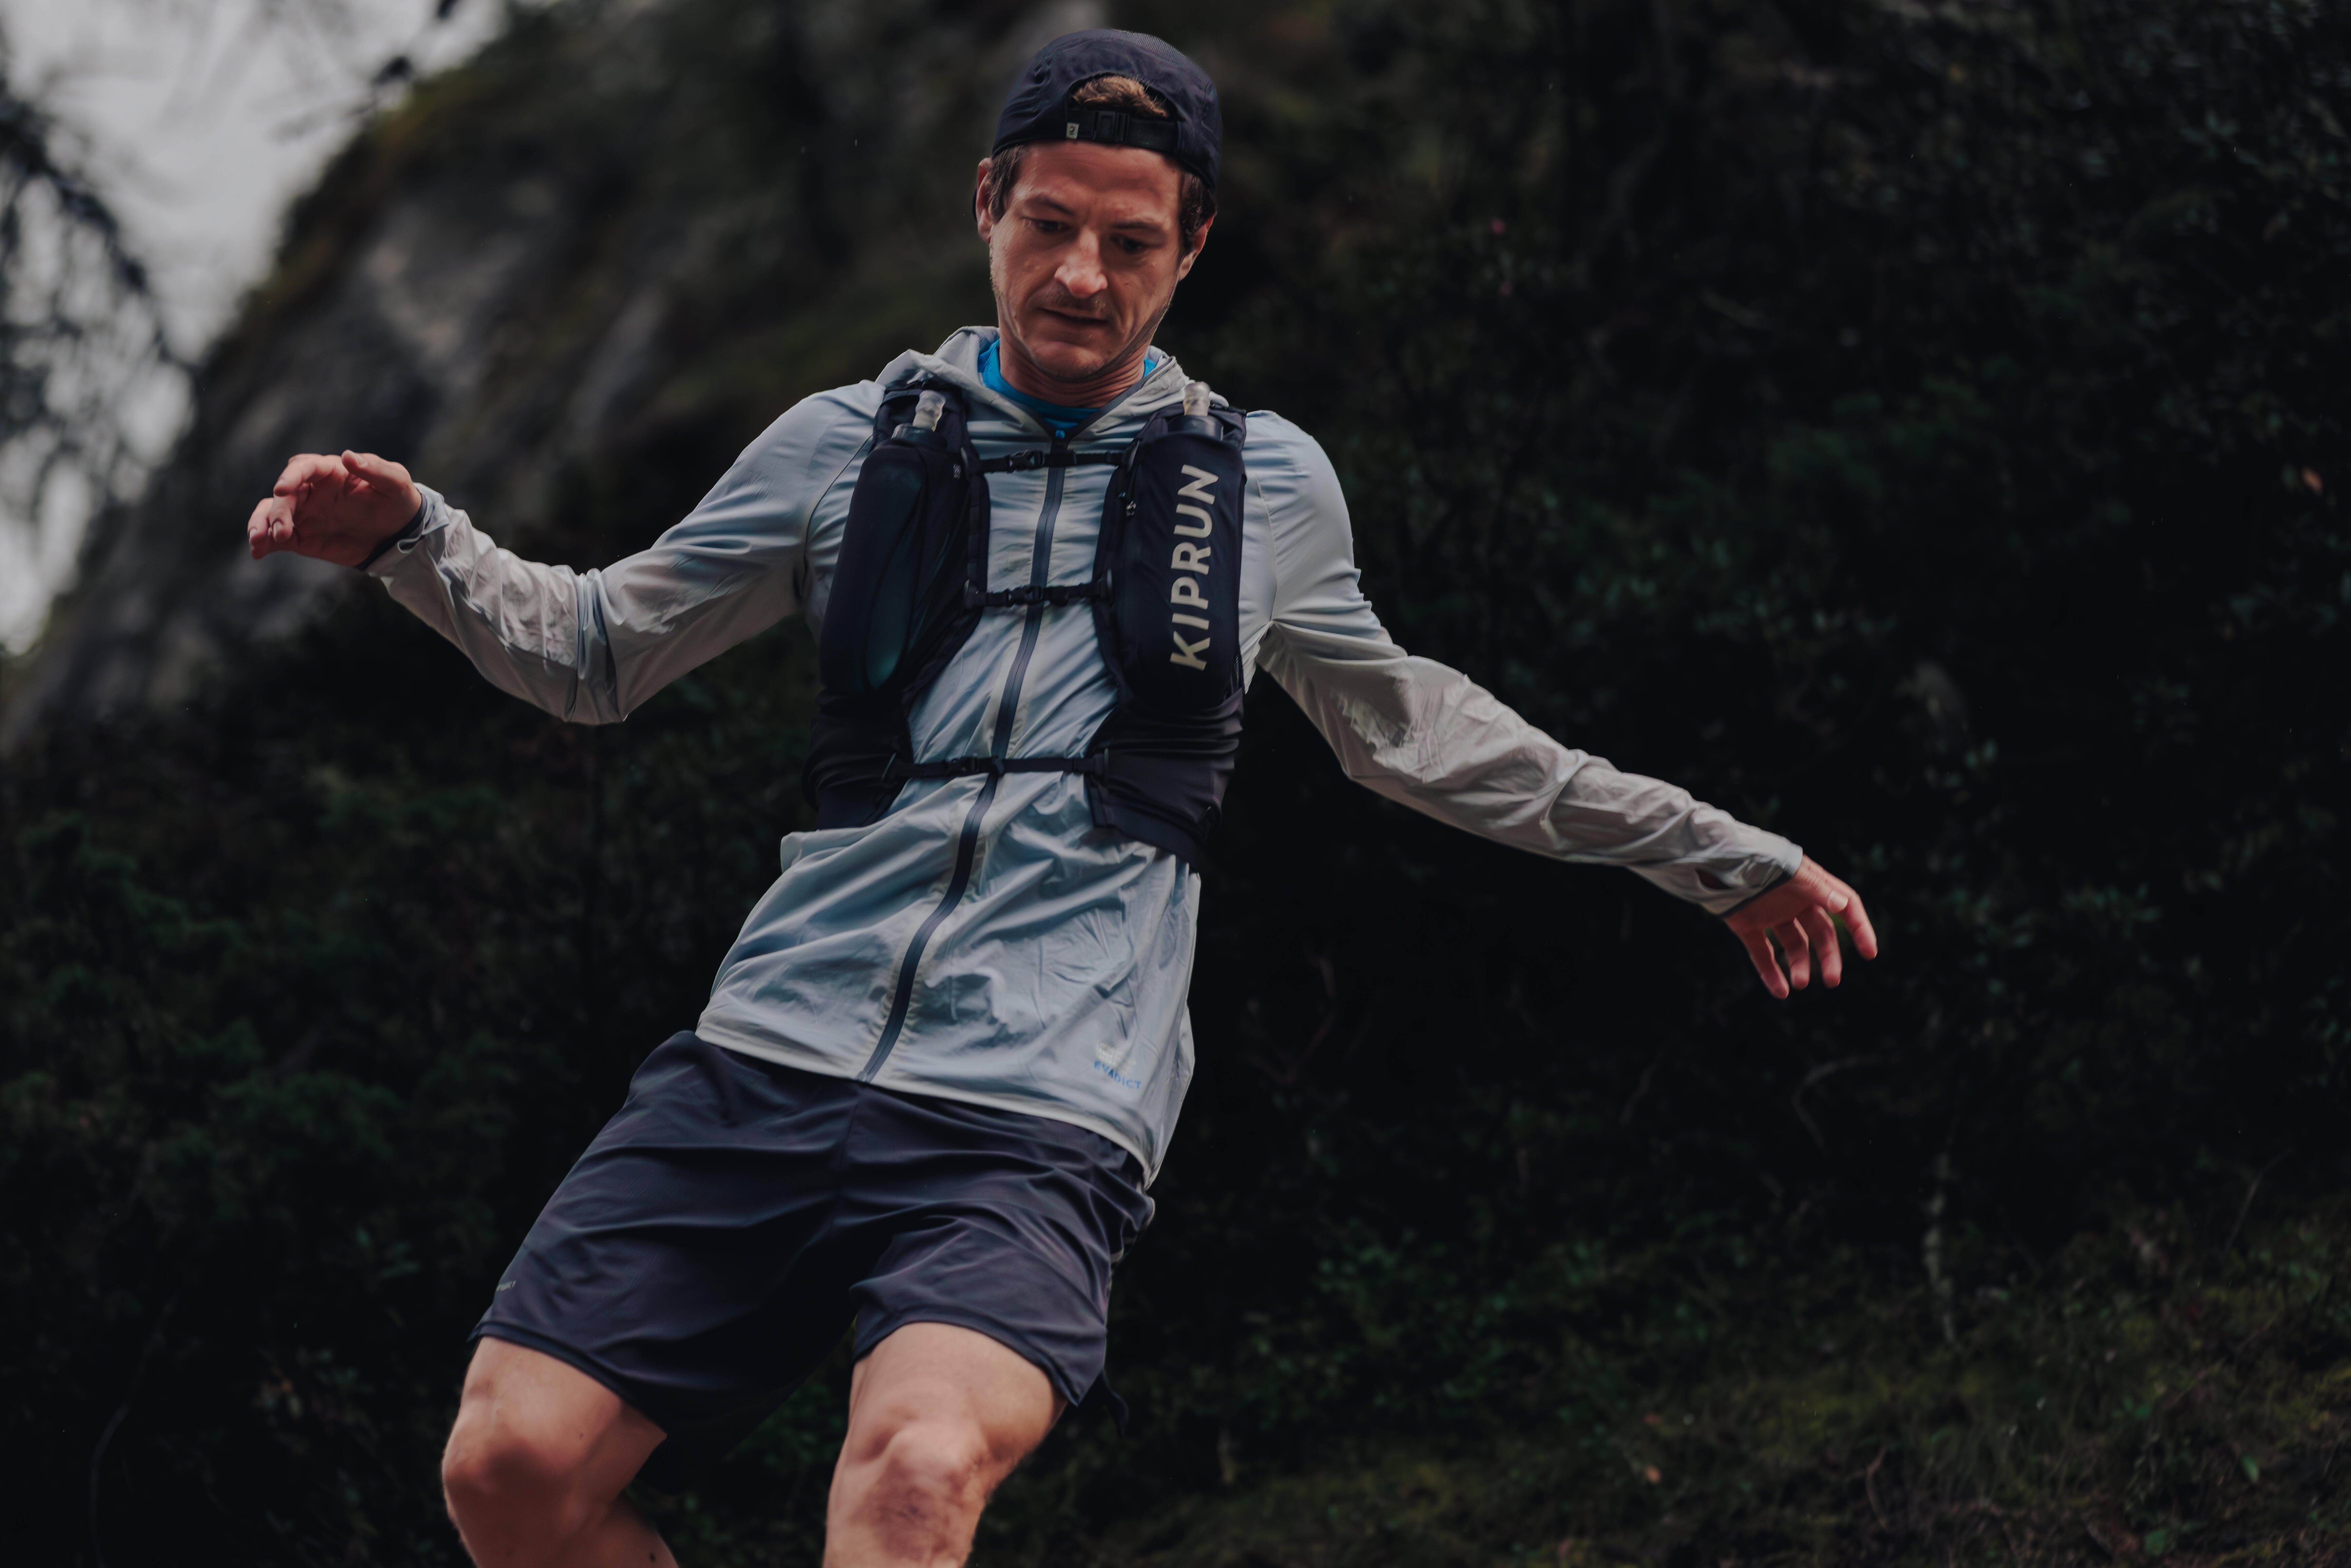 SHORT BAGGY TRAIL RUNNING HOMME EVADICT